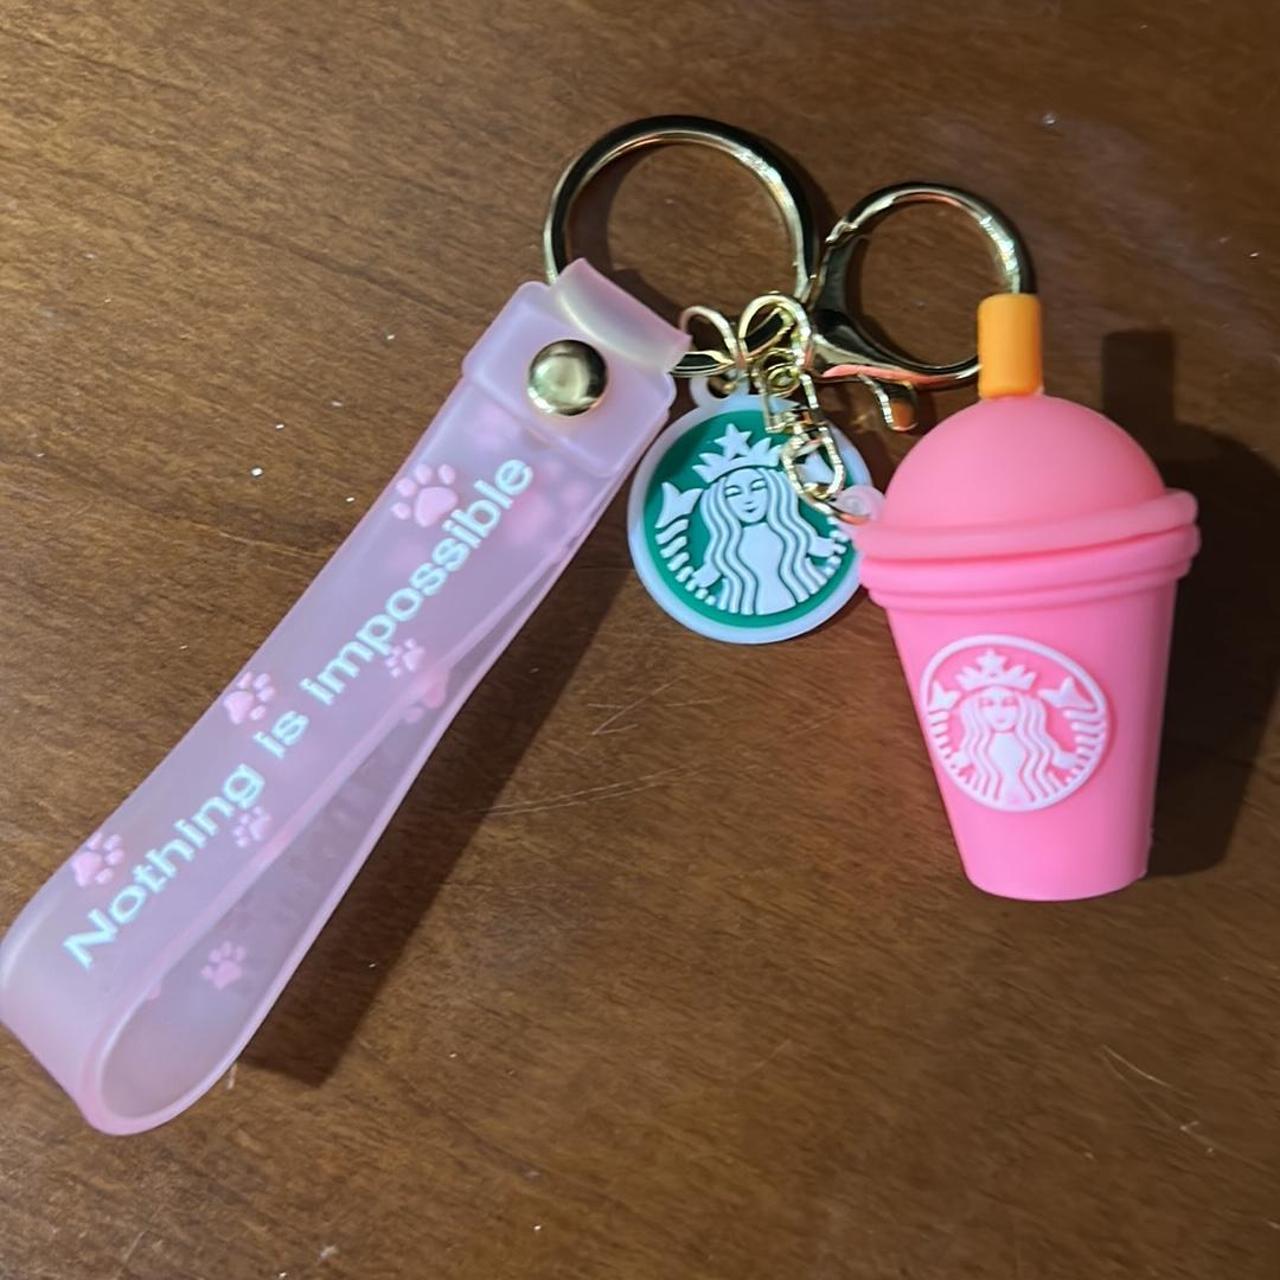 Starbucks hot cup keychain brand new in the - Depop